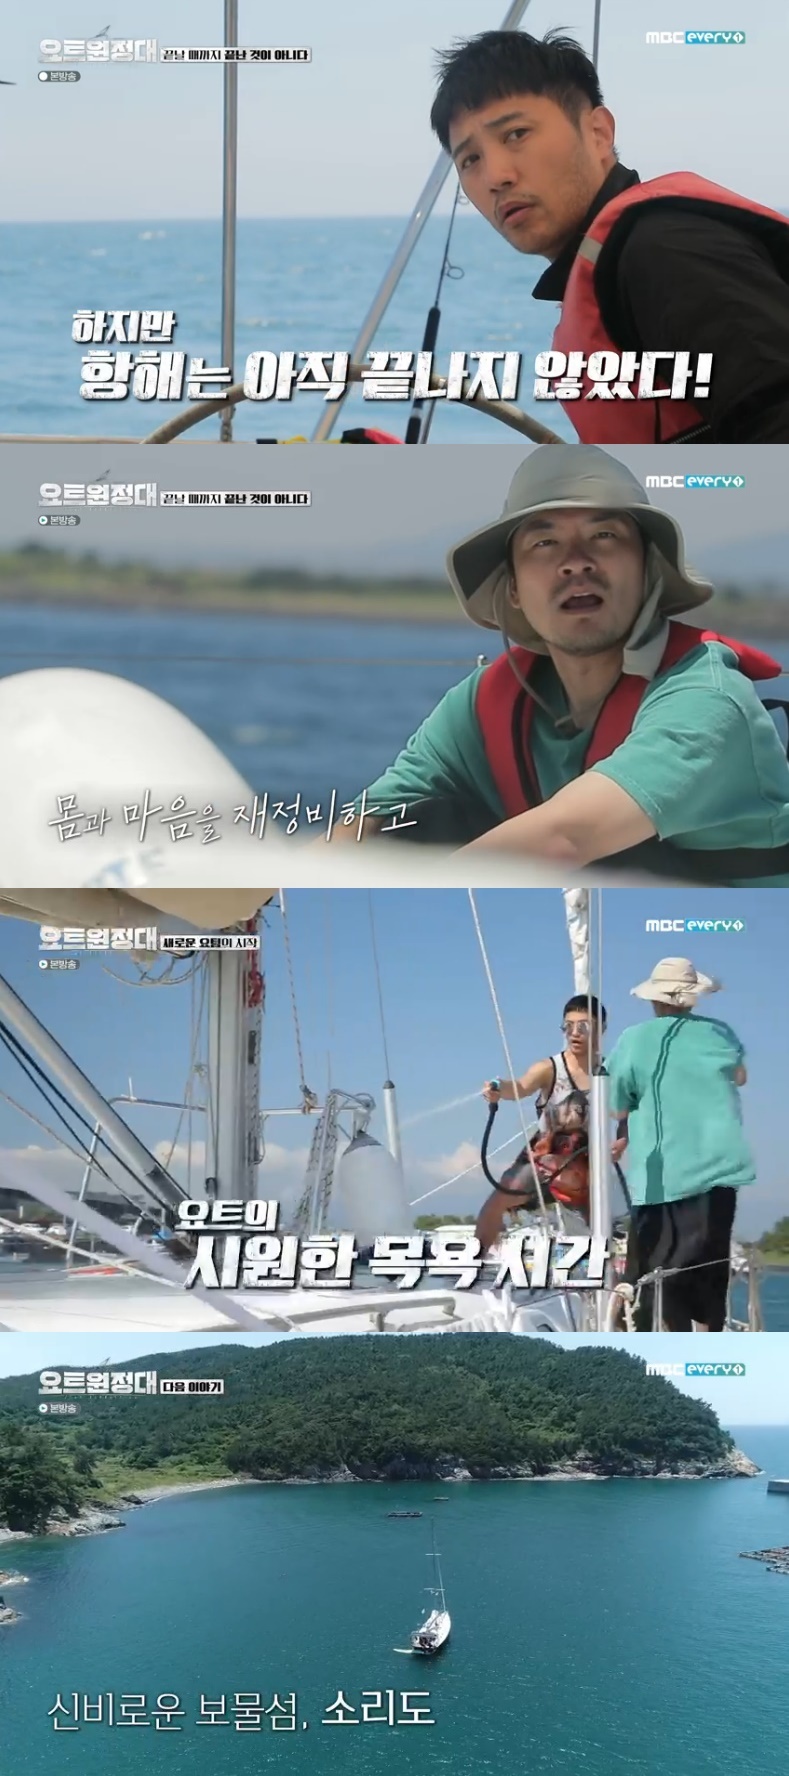 Seoul = = The Yot Expedition, which decided to return to rough waves, returned to Jeju Island.Jin Goo, Choi Siwon, Chang Kiha, Song Ho Jun and Kim Seung-jin arrived safely at Jeju Island in MBC Everlon entertainment program Yot Expedition broadcast on the afternoon of the 5th.Jin Goo made a fond-hearted Confessions in a phone conversation with his wife, who had missed him; those who made a comeback to Korea begin another experience.Crewes sat around the cabin and ate calmly: Have you ever cooked like this and made your parents do it? Everyone became fascinated by Choi Siwons words.I replied that there was no Chang Kiha, and Jin Goo, who was next to me, was shocked and said, Oh, I have never really done it. No. I have to go and do it.They only realized a lot of things as they sailed; Chang Kiha said: I just want to stand on a ground that doesnt move.It is possible to stand without giving strength and not having to catch it anywhere. Among them, Song Ho-joon said, I think I will miss the sea air, wind, and horizontal line when I go to land, and I will miss the big waves that I thought I would hate so much.Captain Kim Seung-jin said, It is a great meaning for me to give a little taste of the sea to new people. I do not think it would be better to find fun instead of adventure of yachts for the rest of the year.Kim Seung-jin later informed him that the future is 44 miles to Jeju Island, it will enter within six hours; the yacht expedition cruised.Chang Kiha, Choi Siwon became busy: sharing opinions with breakfast menus; Choi Siwon expressed confidence, saying, I have a good opinion on ramen.The menu was miso noodles; Chang Kiha took out the shiitake powder that had been prepared in advance and added a rich flavor; Choi Siwon admired the soup flavor and praised it as great.Crewes admired the taste of soup and live noodles, and poured out favorable comments on miso ramen.The members were excited when their cell phones started bursting. Song Ho-joon laughed when he heard the text messages.Jin Goo said, I told my family that I would not be able to contact them, but I did not contact them like this.He soon made a phone call with his wife, who said, Now Im in Korea territorial waters, and Jin Goo said, I miss you so much, here I just think of my family.Ill call you later. I love you. At this time, the Korean maritime government appeared and escorted the yacht expedition. Kim Seung-jin explained, It is about an hour later.The crew went into each room and began to organize their luggage. Kim Seung-jin folded the sail just before Jeju Island arrived.The crew, who returned from rough winds, felt strangely emotional: Kim Seung-jin said: There is no decision that was not made in the world, its all a good decision.The first goal was lost, but the second goal did not happen. I think it was good for me to turn and show the pleasure of the yacht. On the other hand, next weeks broadcast will show Crewes to find sound and enjoy various experiences.